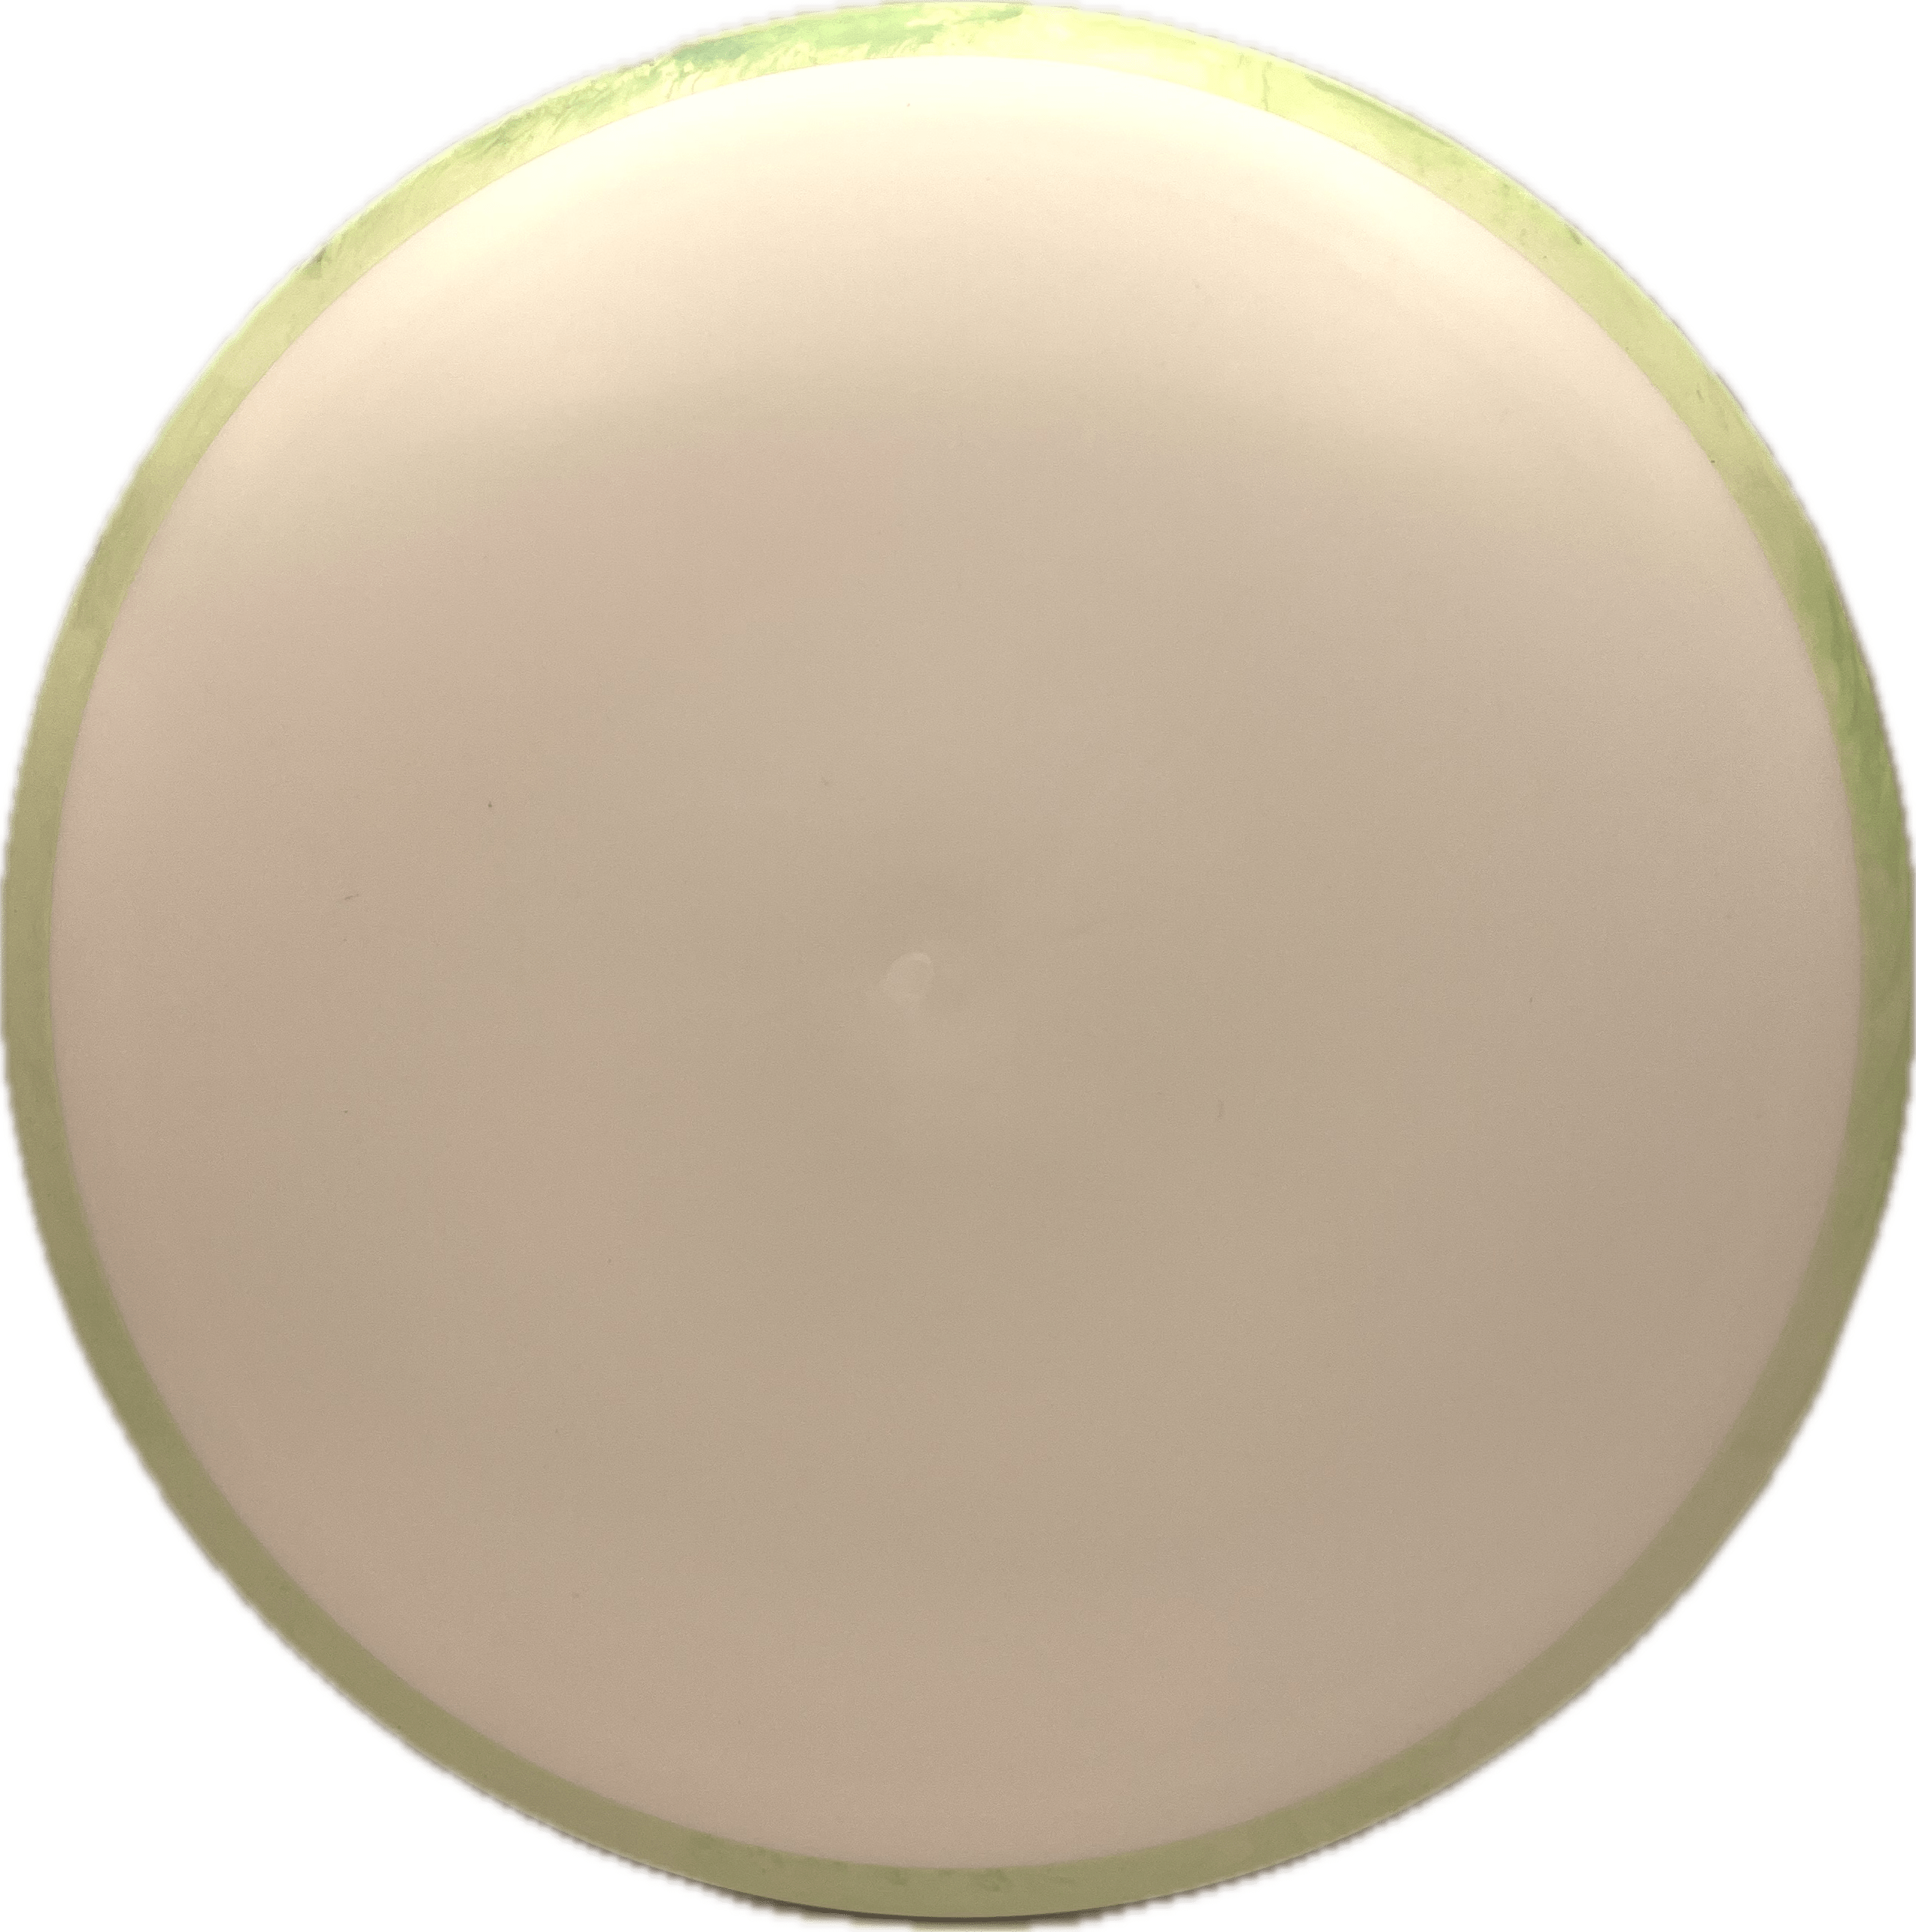 Overthrow Disc Golf Disc Axiom Crave, Fission, 169, White, Faded Green Rim